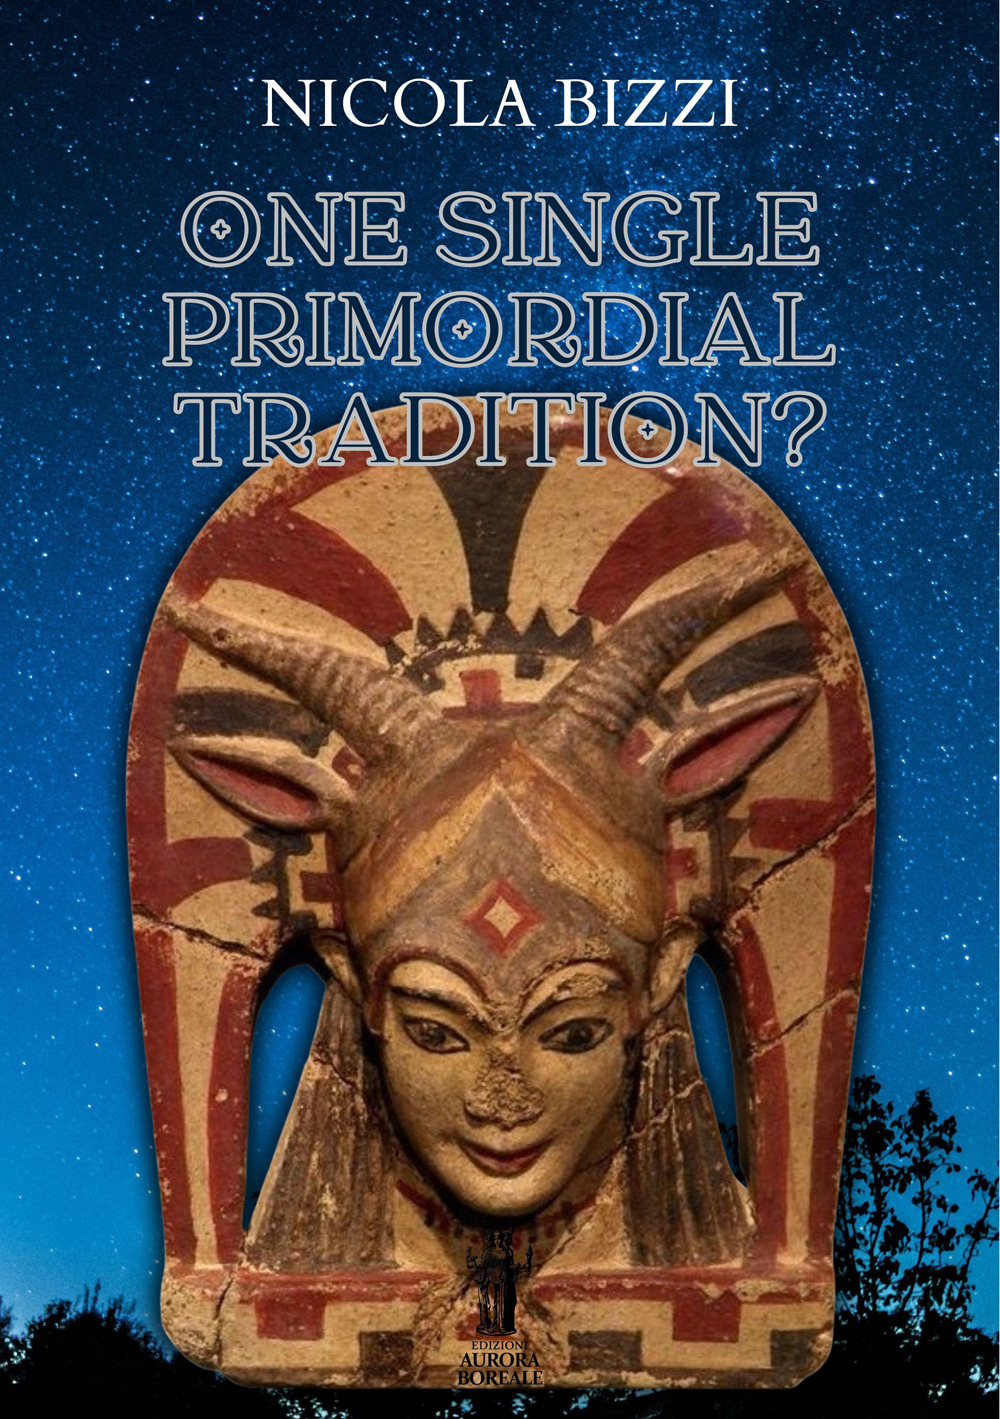 One single primordial tradition?